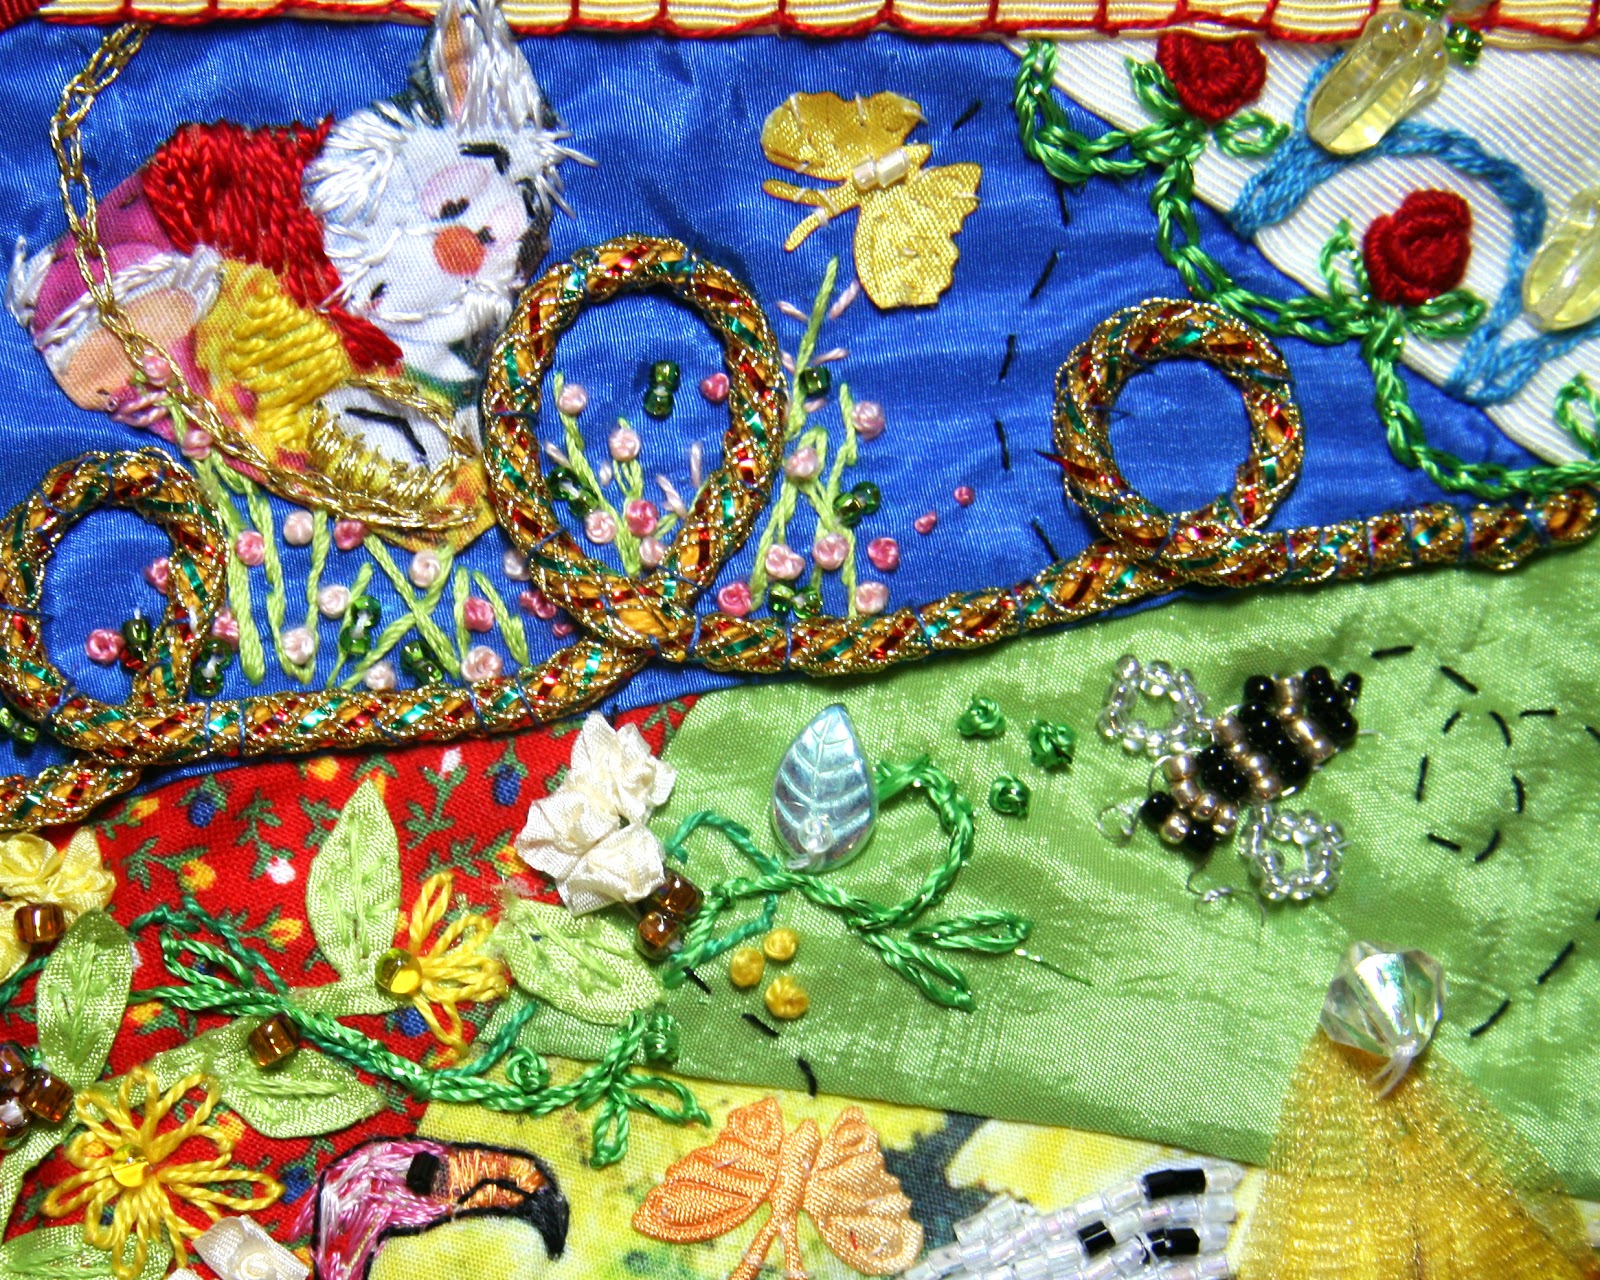 Crazy Quilt Passion: What is going on in my world?